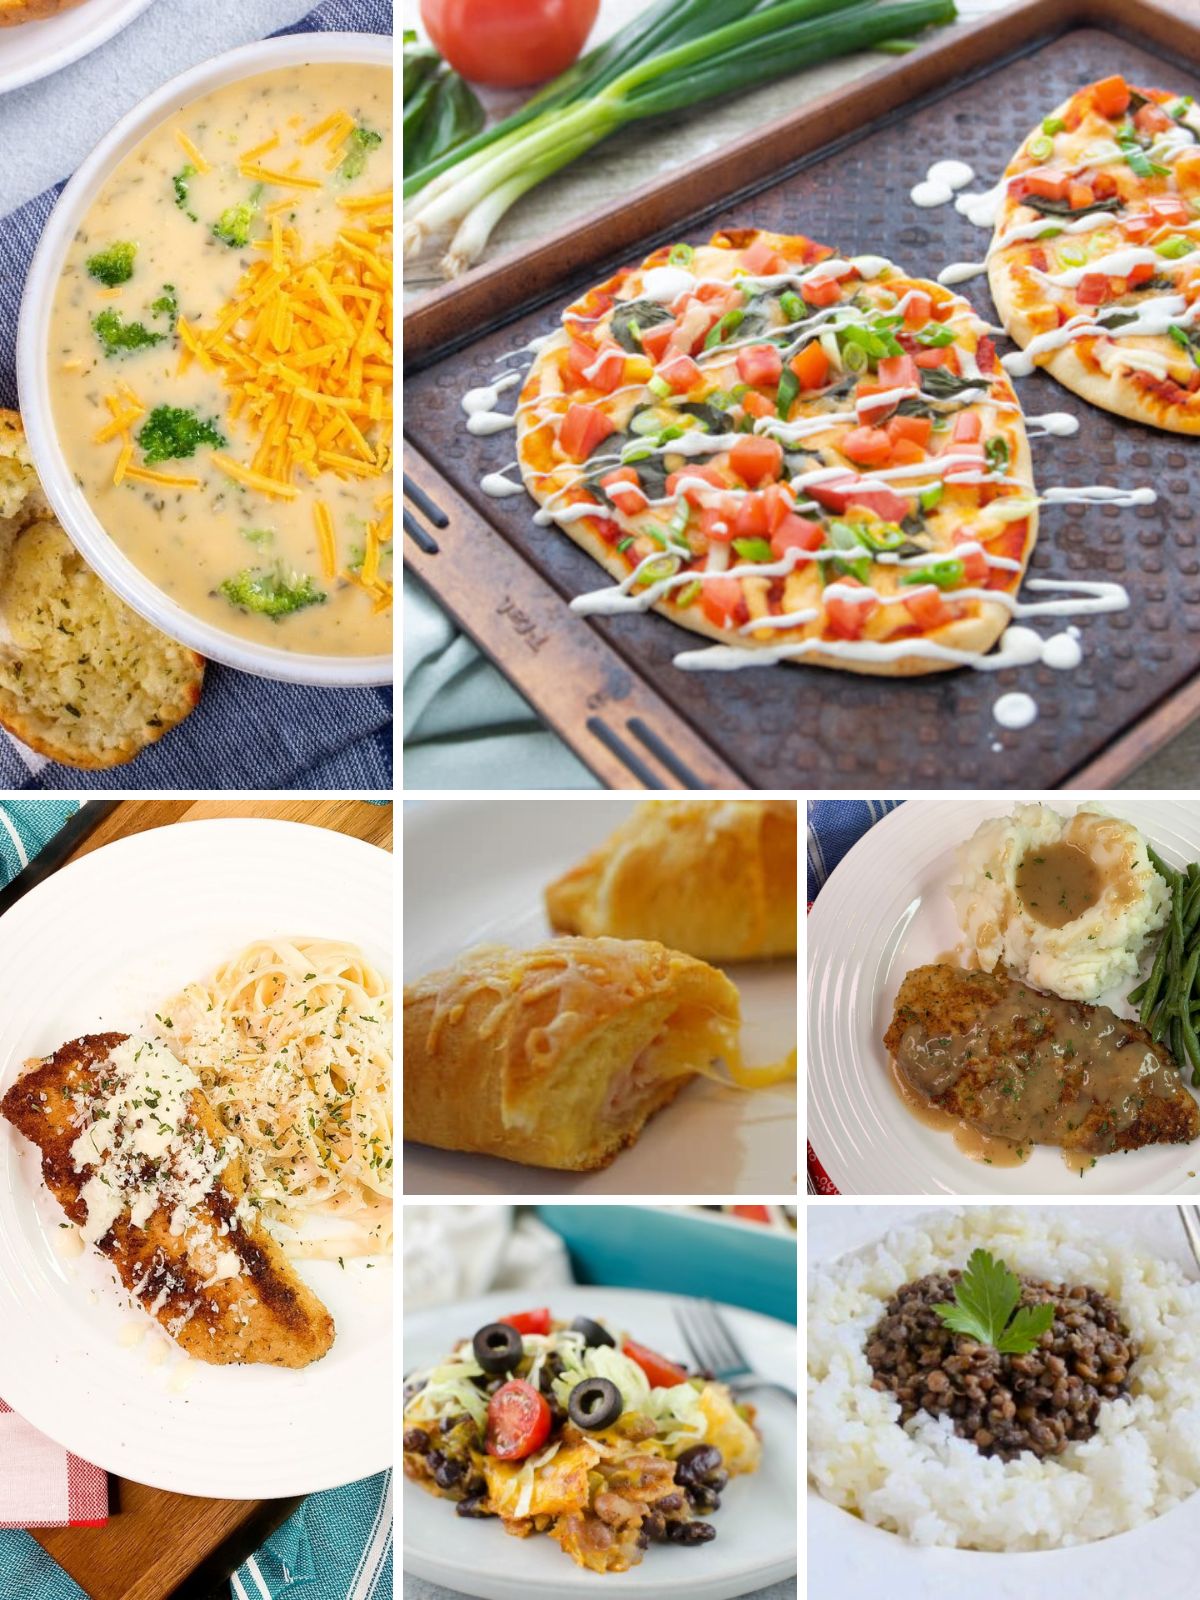 Seven recipes for a 30 minute meal plan.